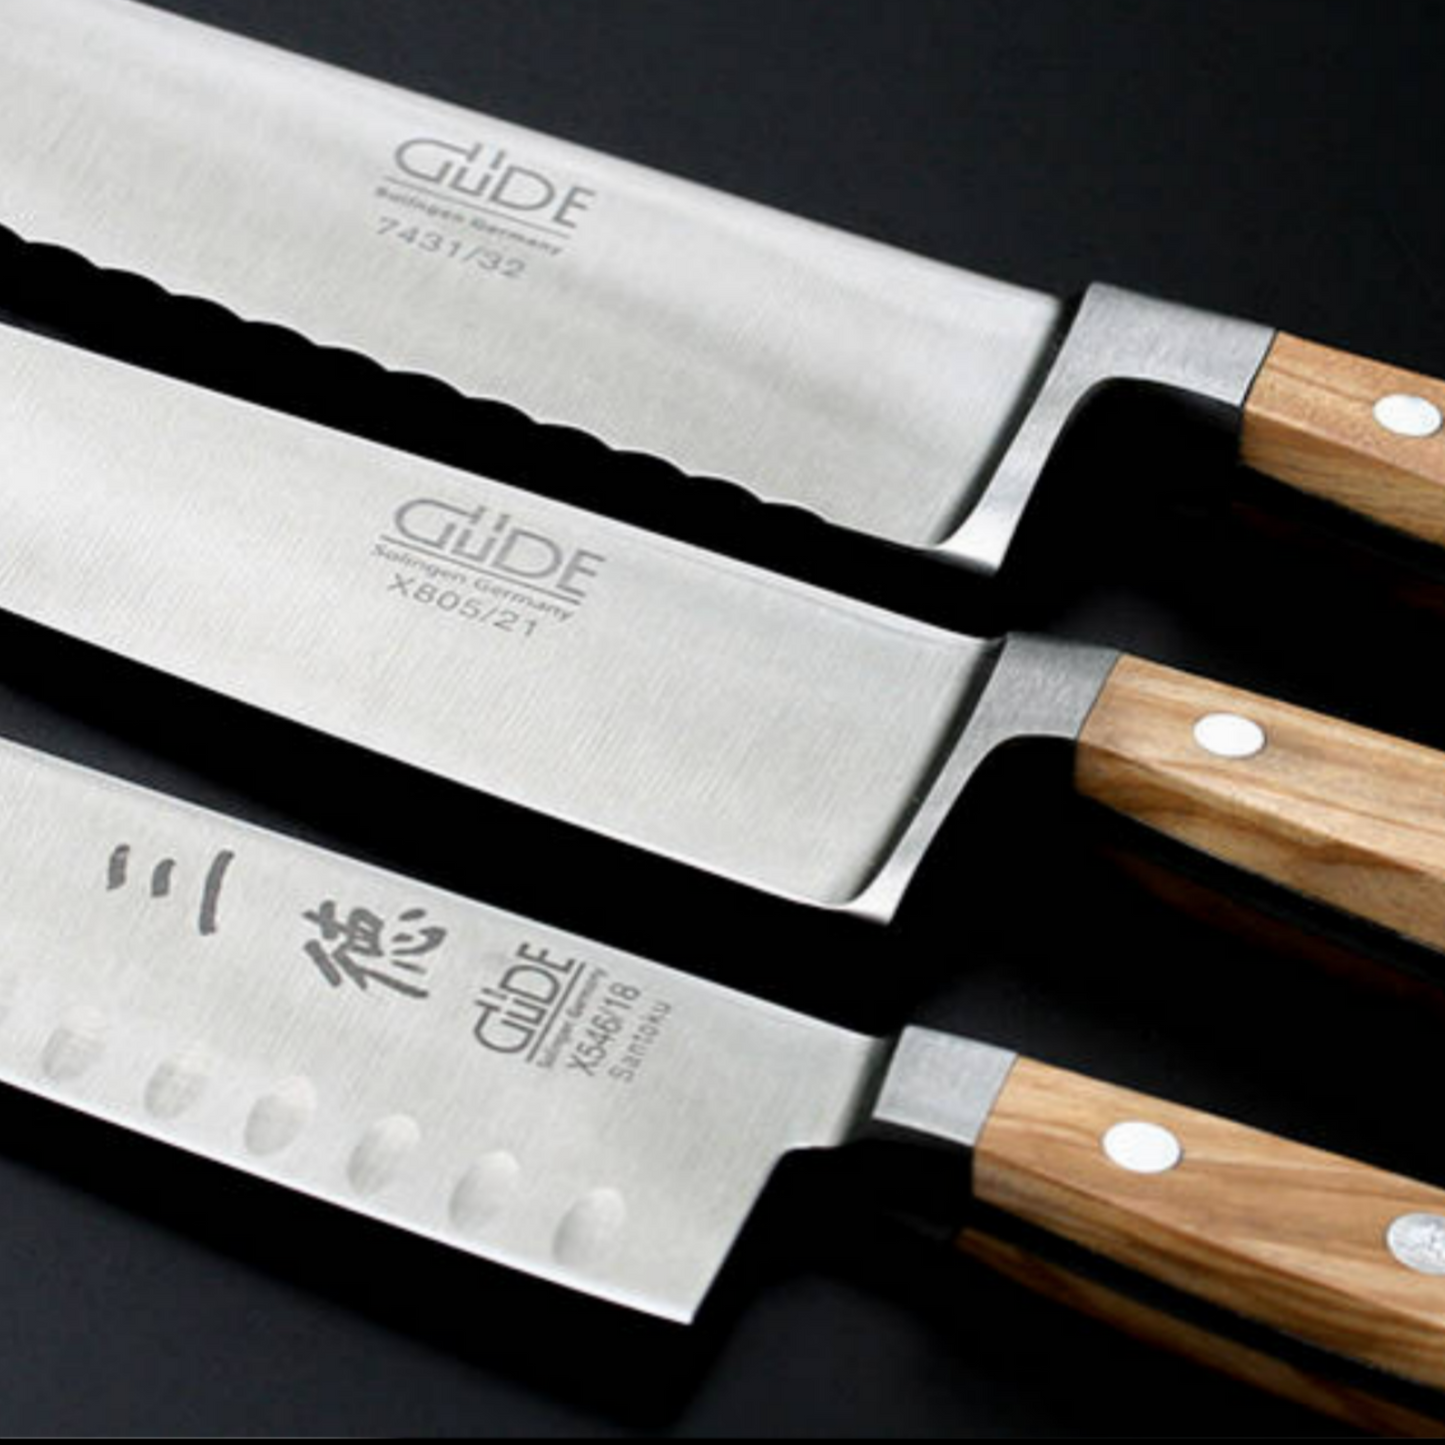 Gude Alpha Olive Series Forged Double Bolster Santoku Knife 7", Olivewood Handle and Granton Edge - GuedeUSA